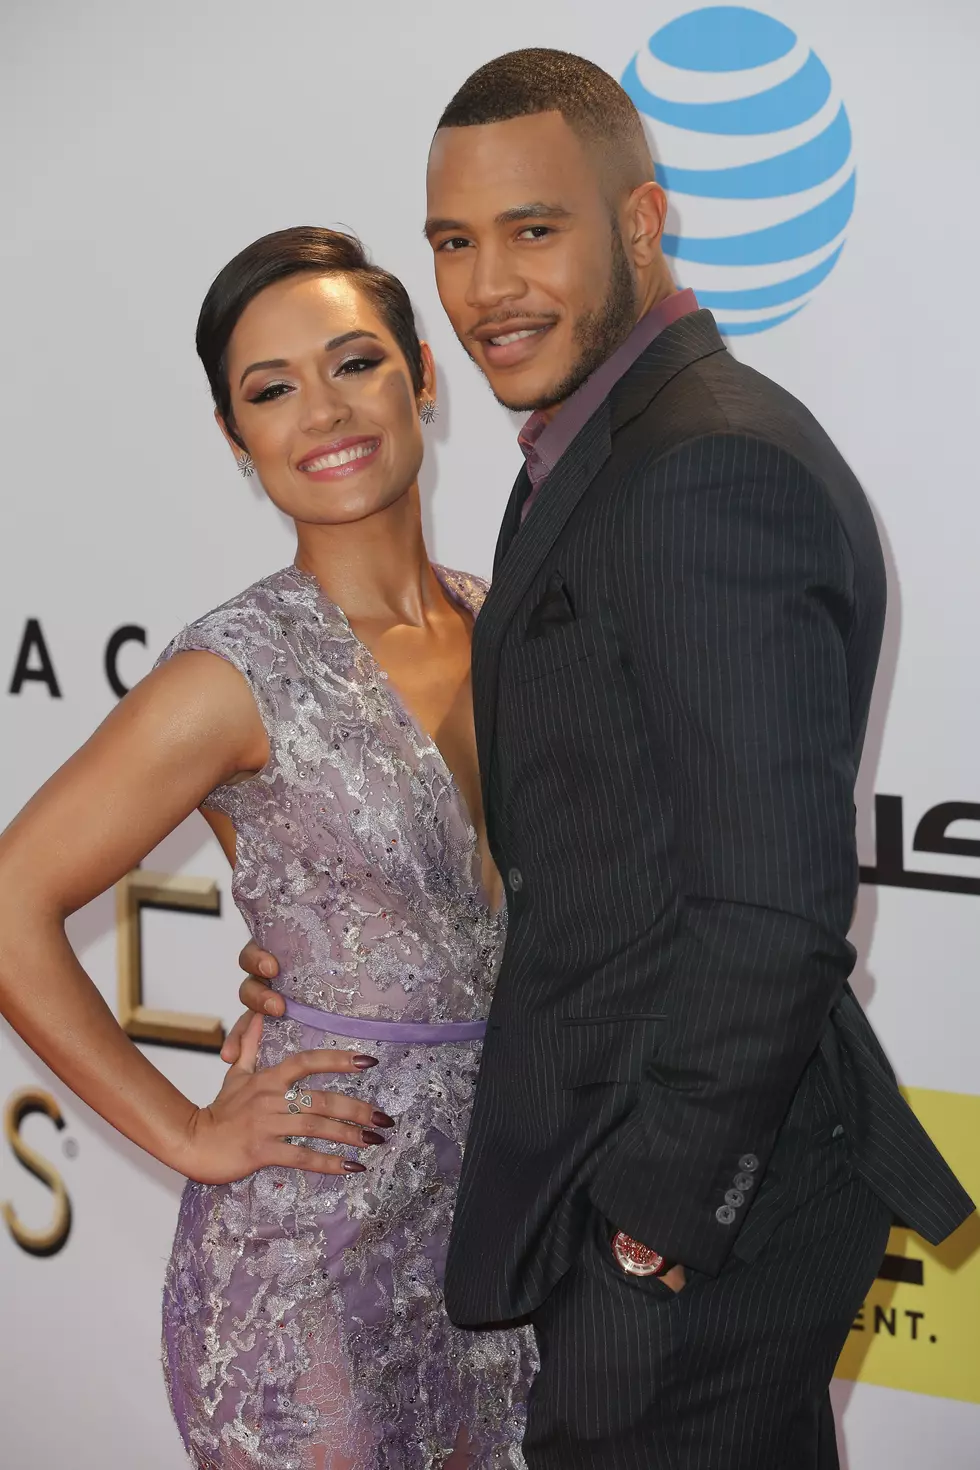 Empire Stars Trai Byers And Grace Gealey Get Married – Tha Wire [VIDEO]